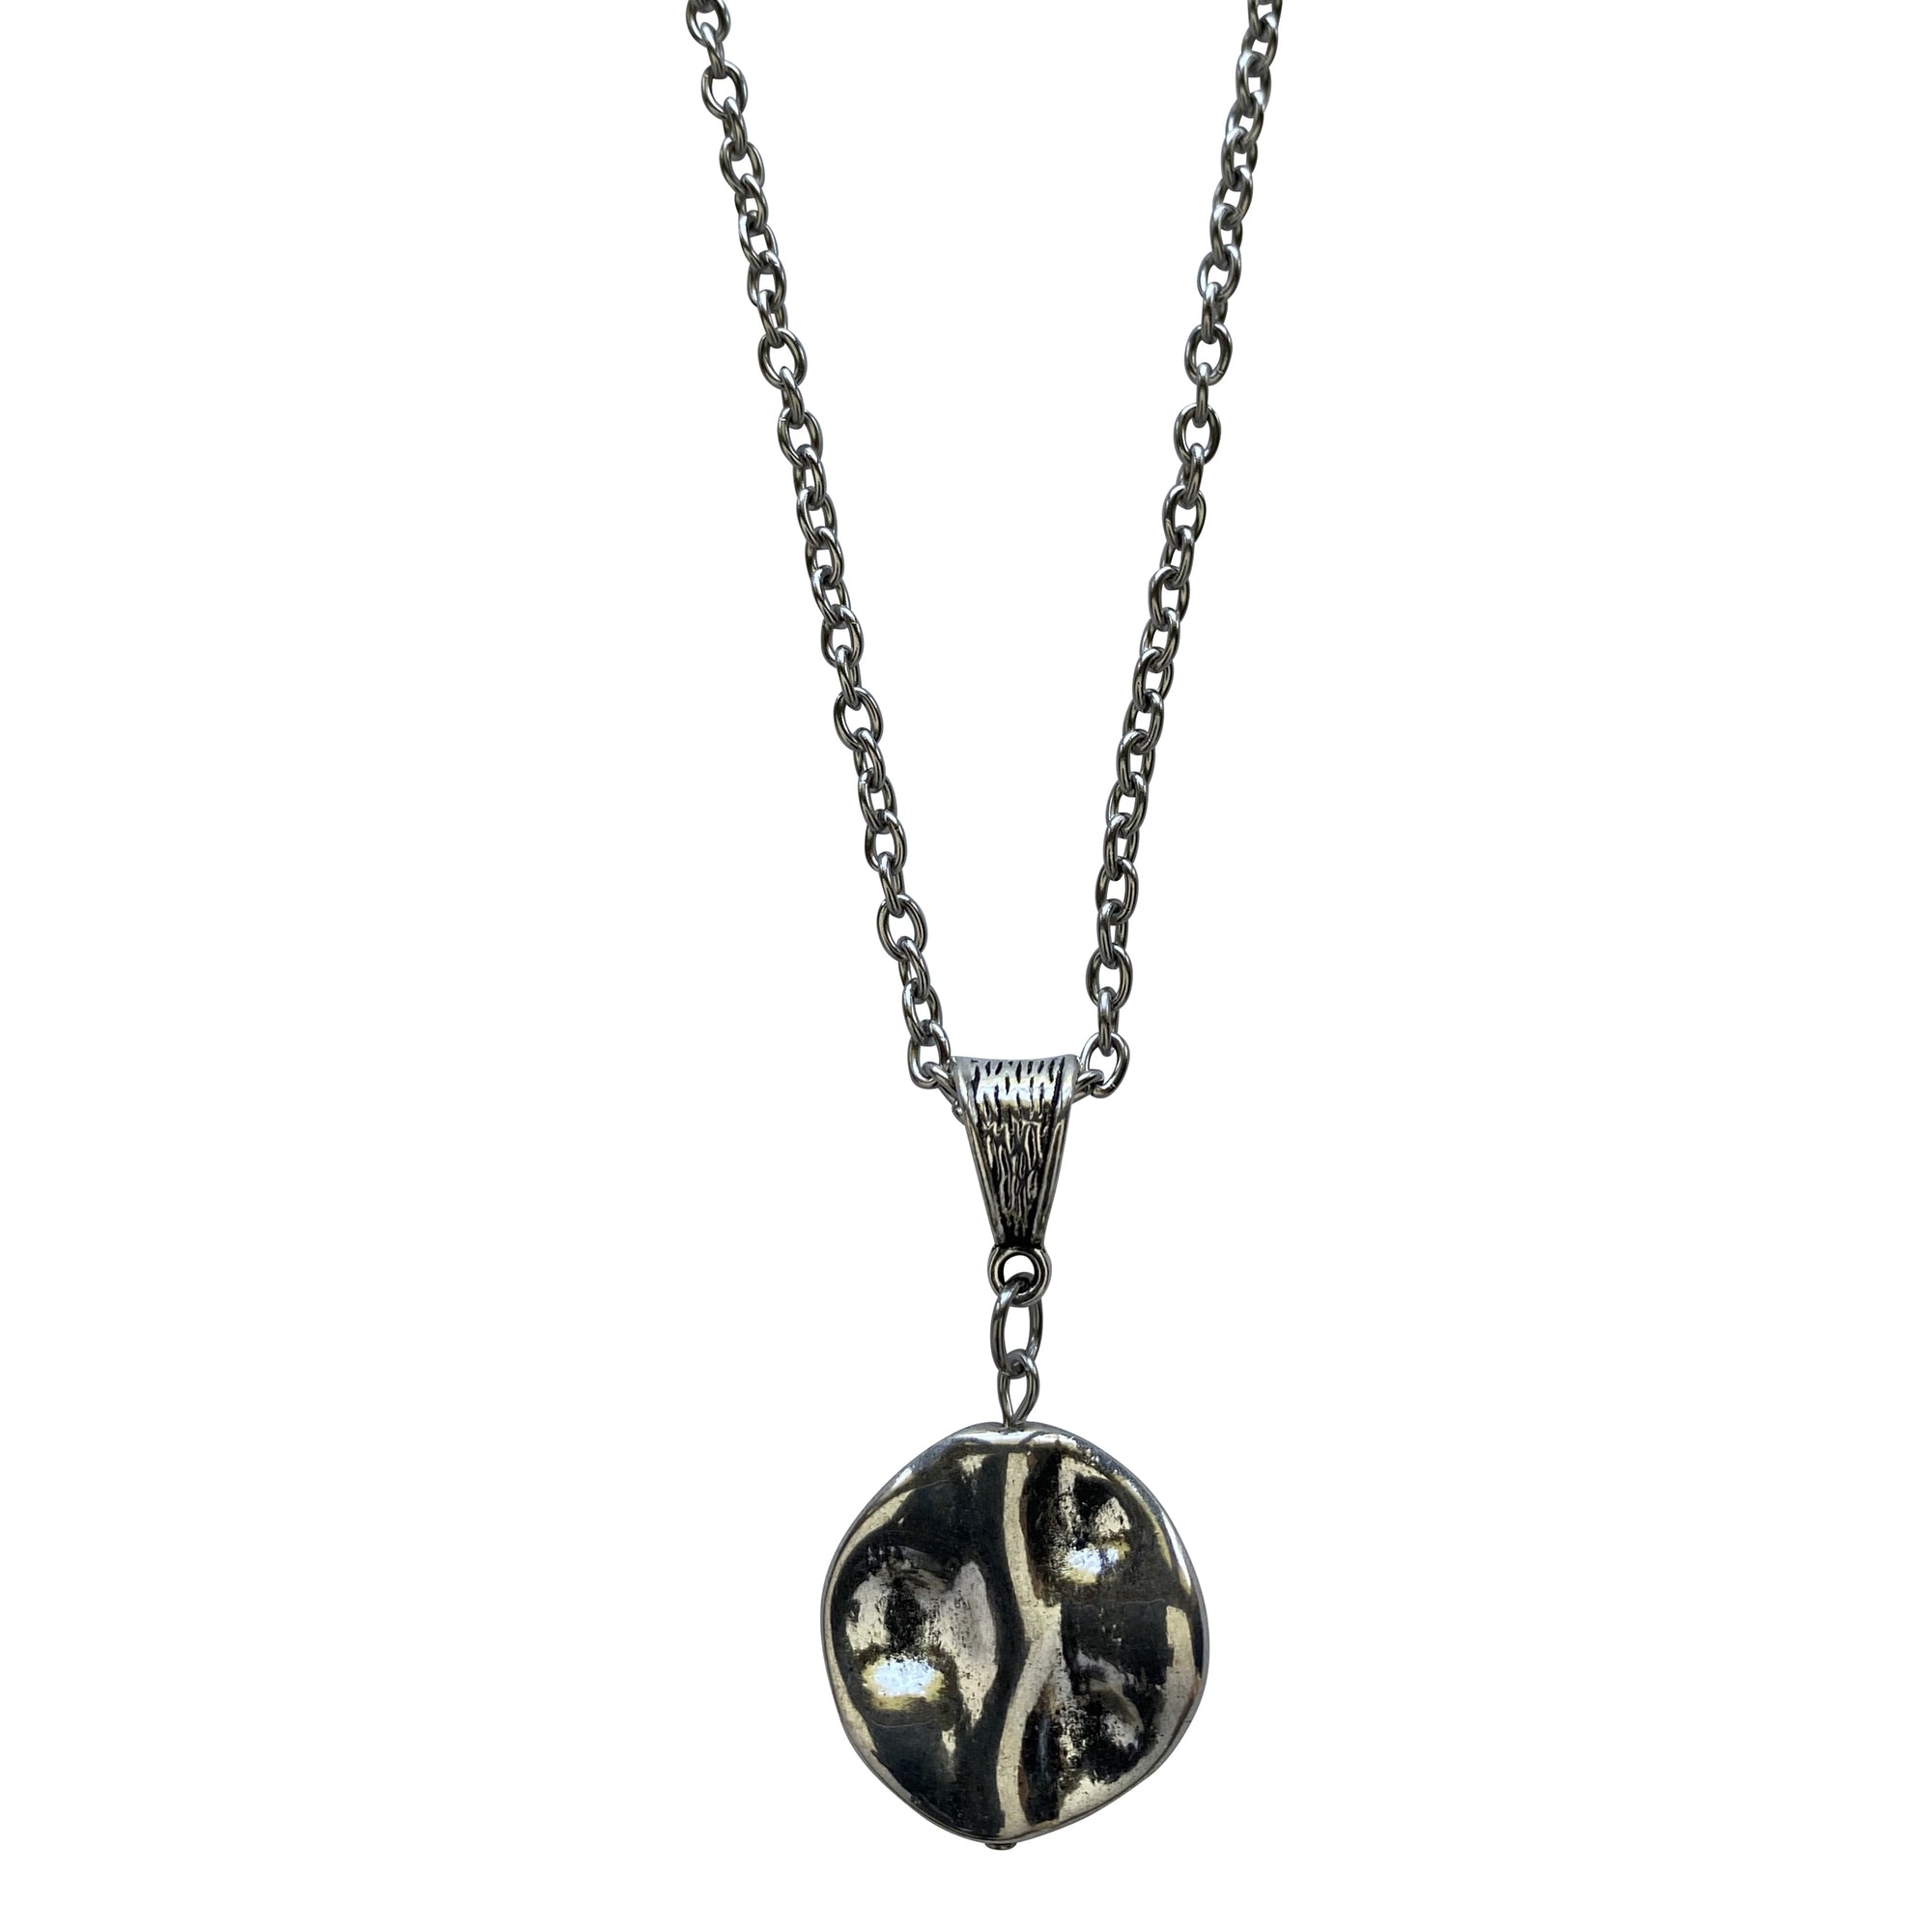 Round Wavy Pendant Necklace with Stainless Steel Chain